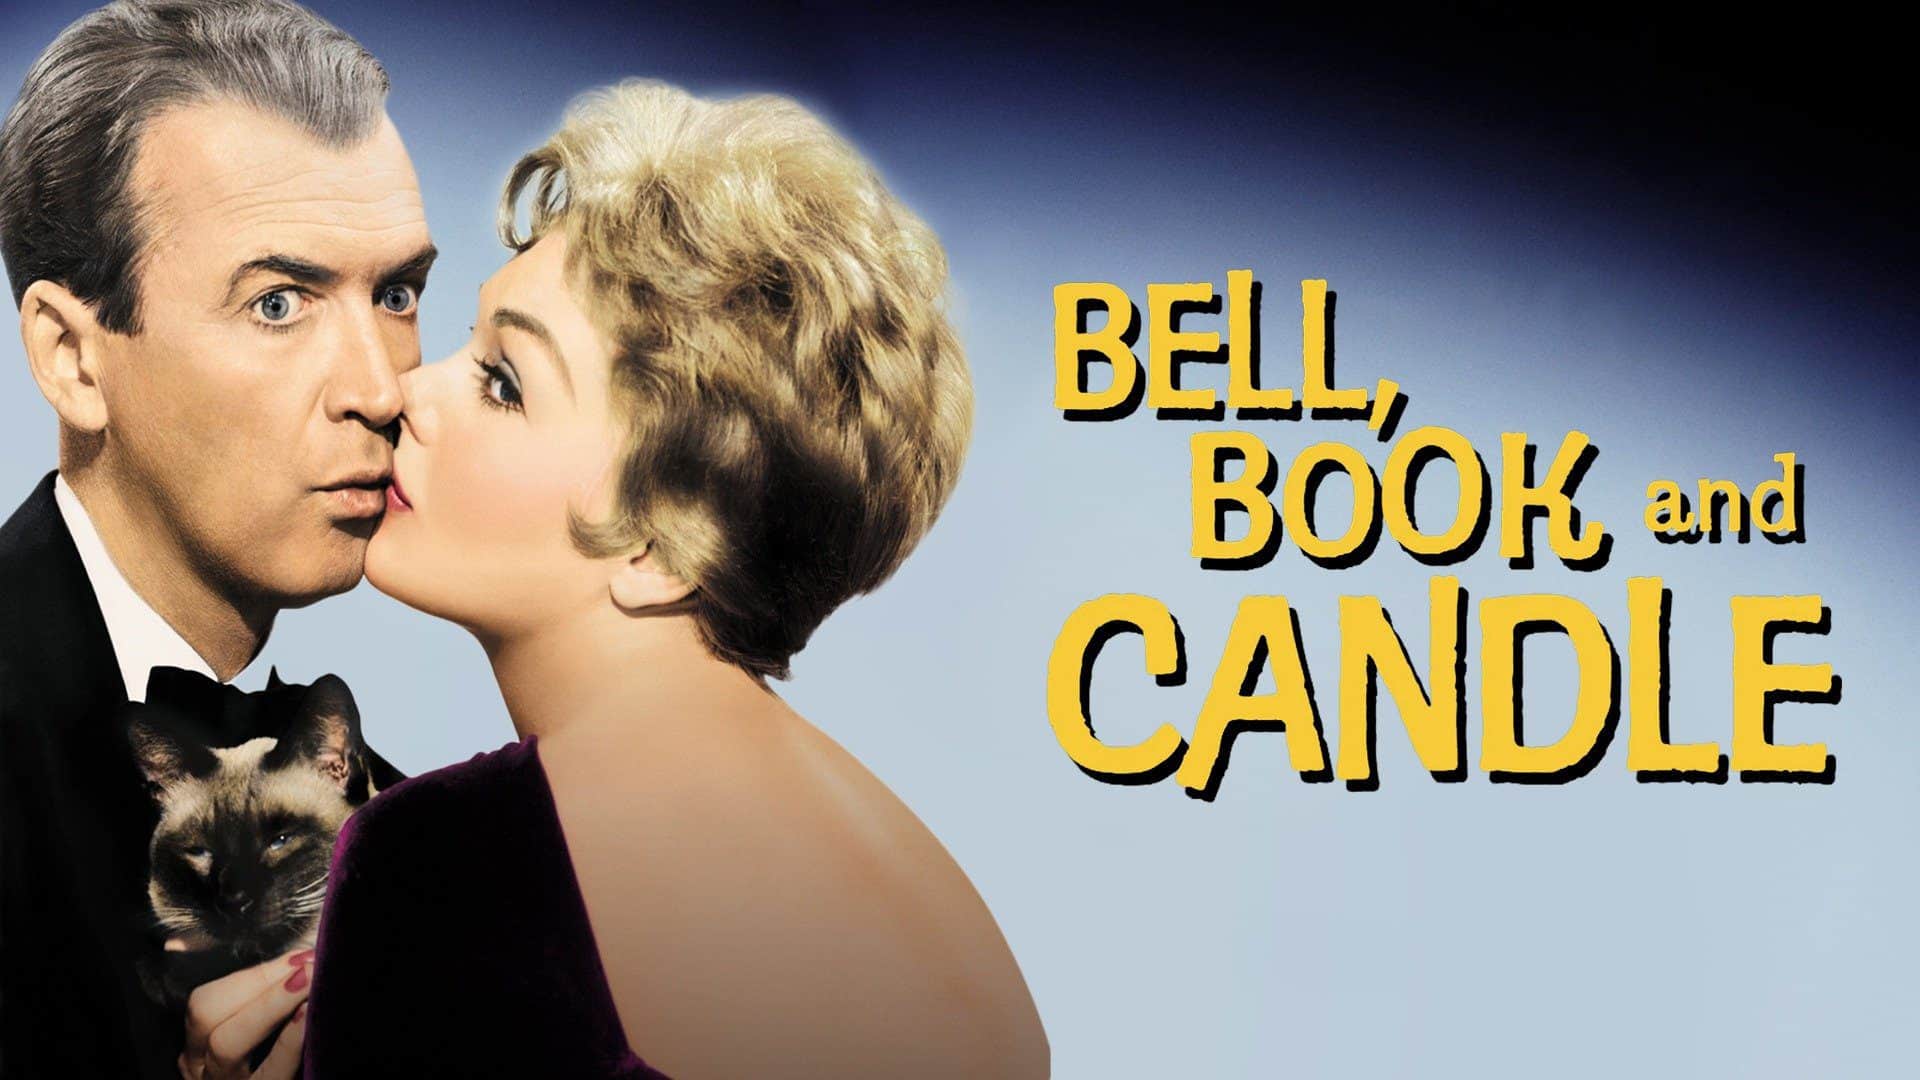 Bell, Book and Candle movie poster